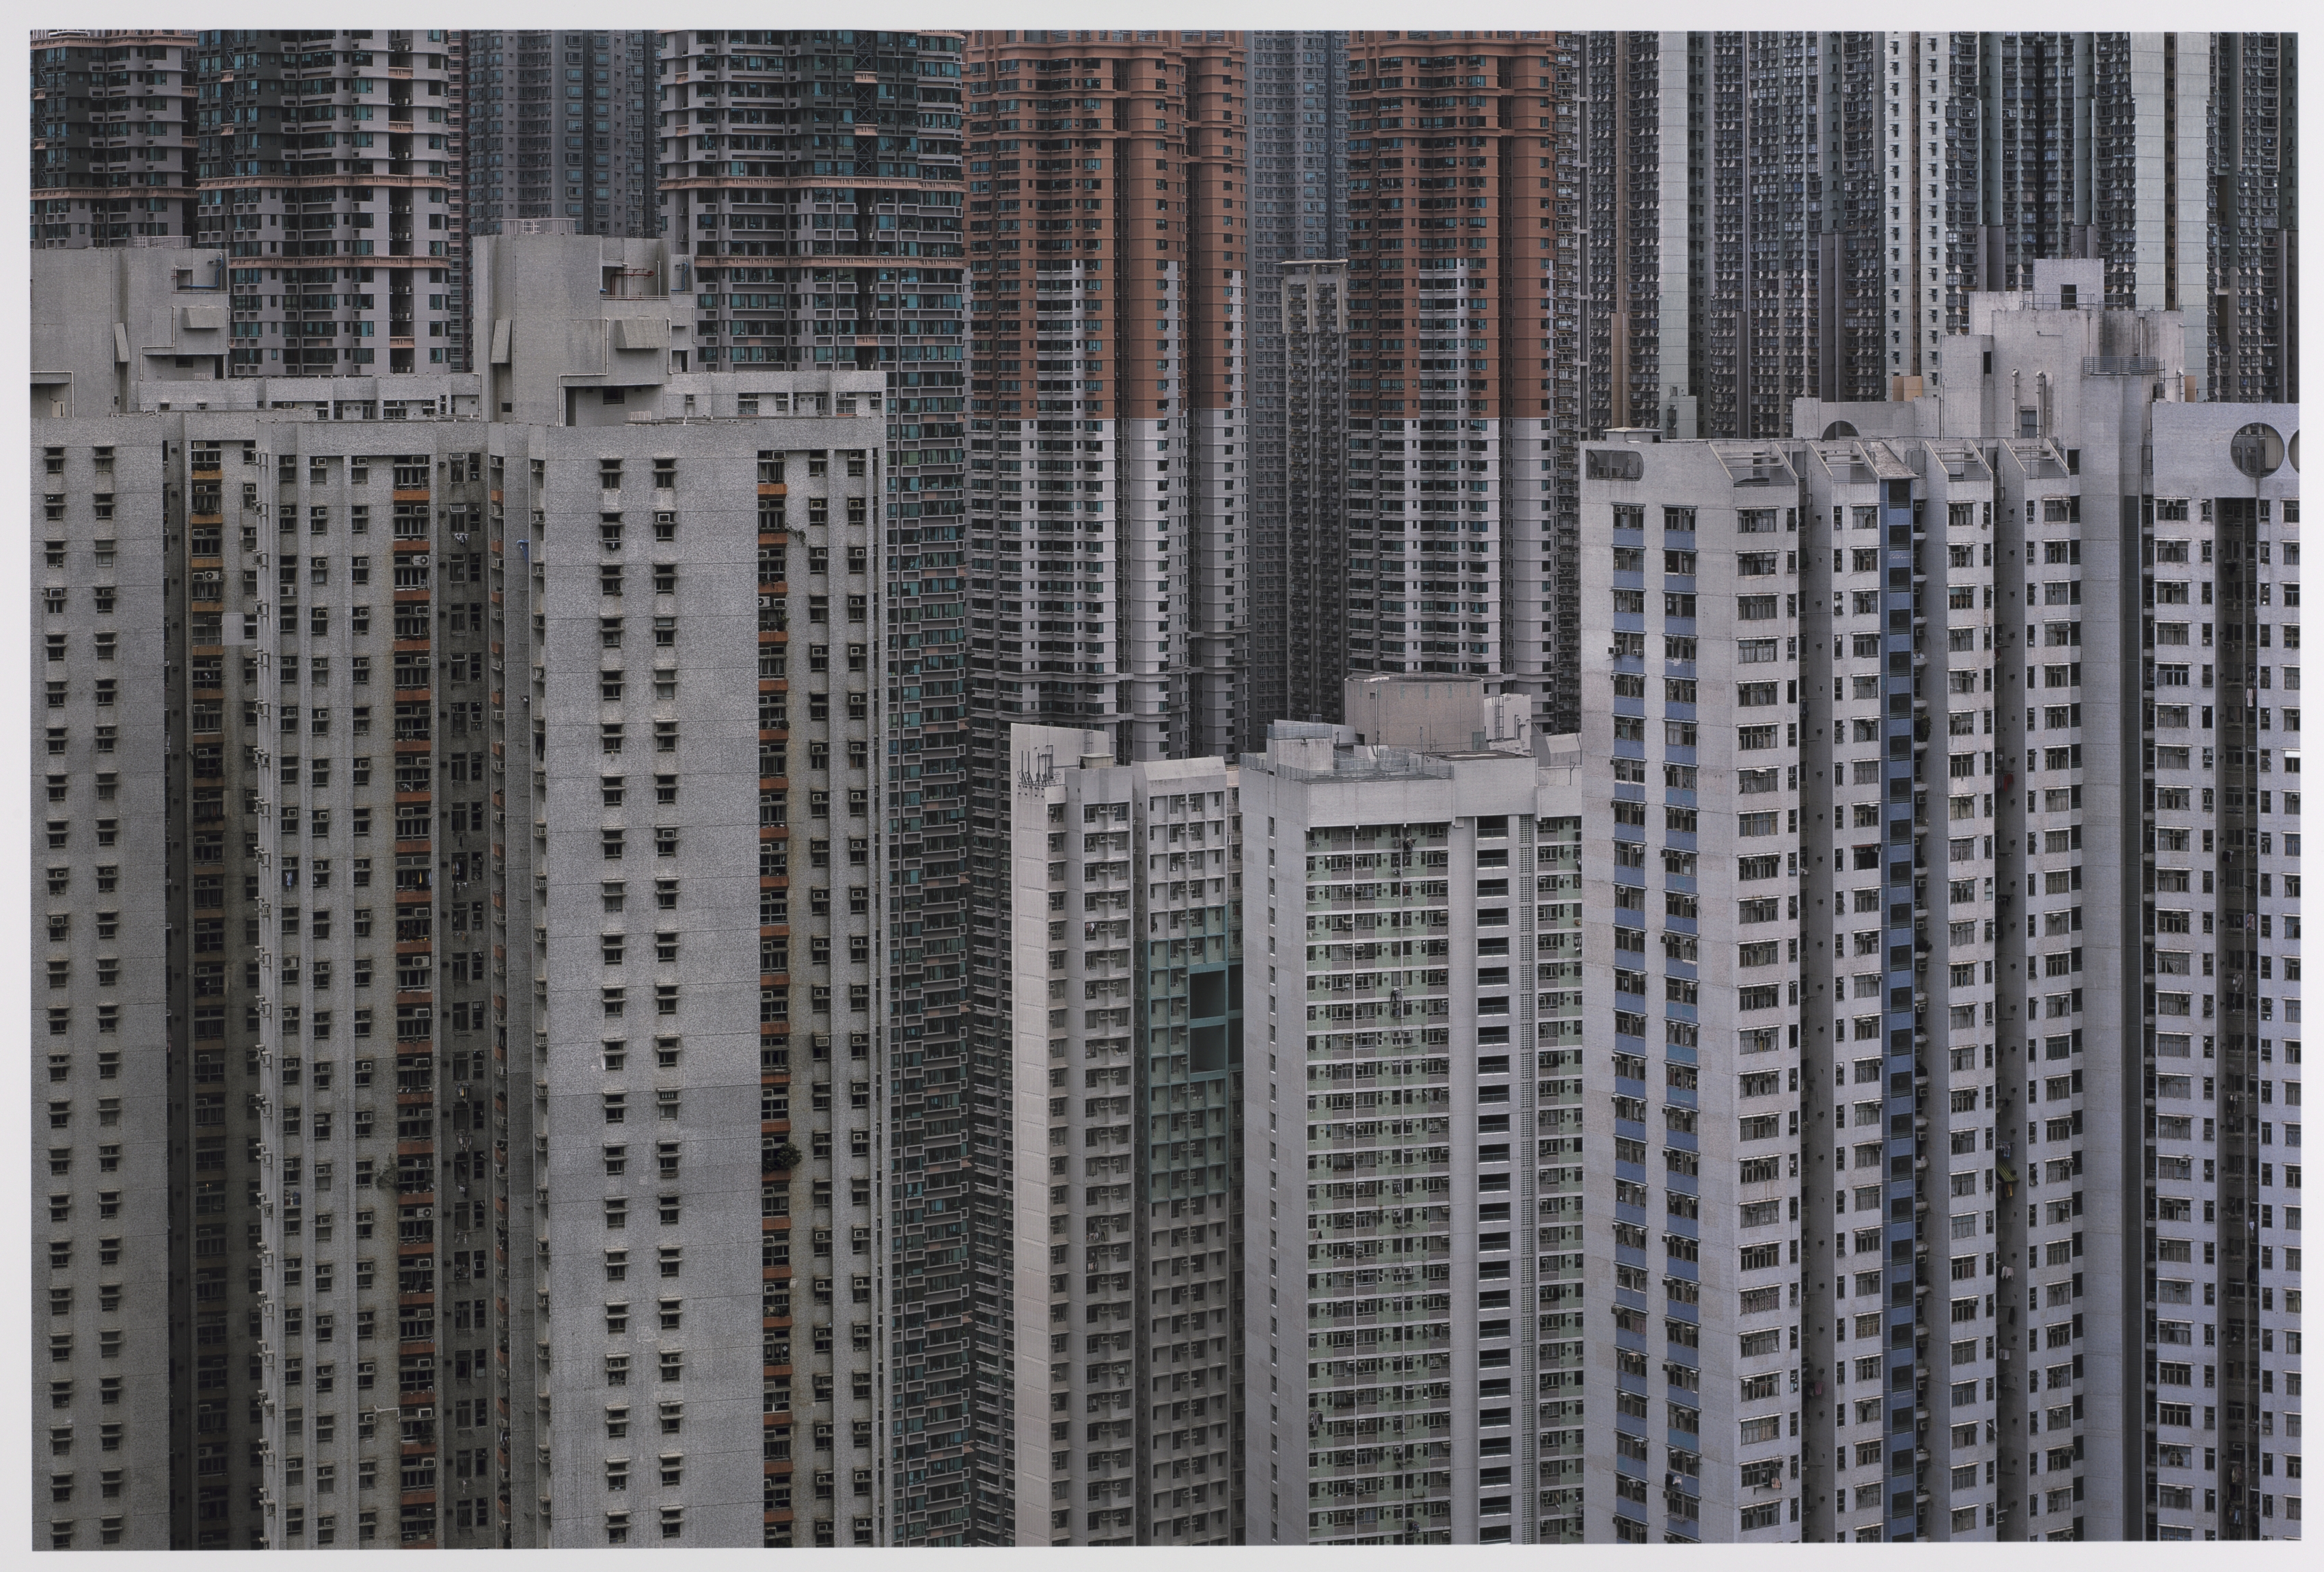 Architecture of Density #45